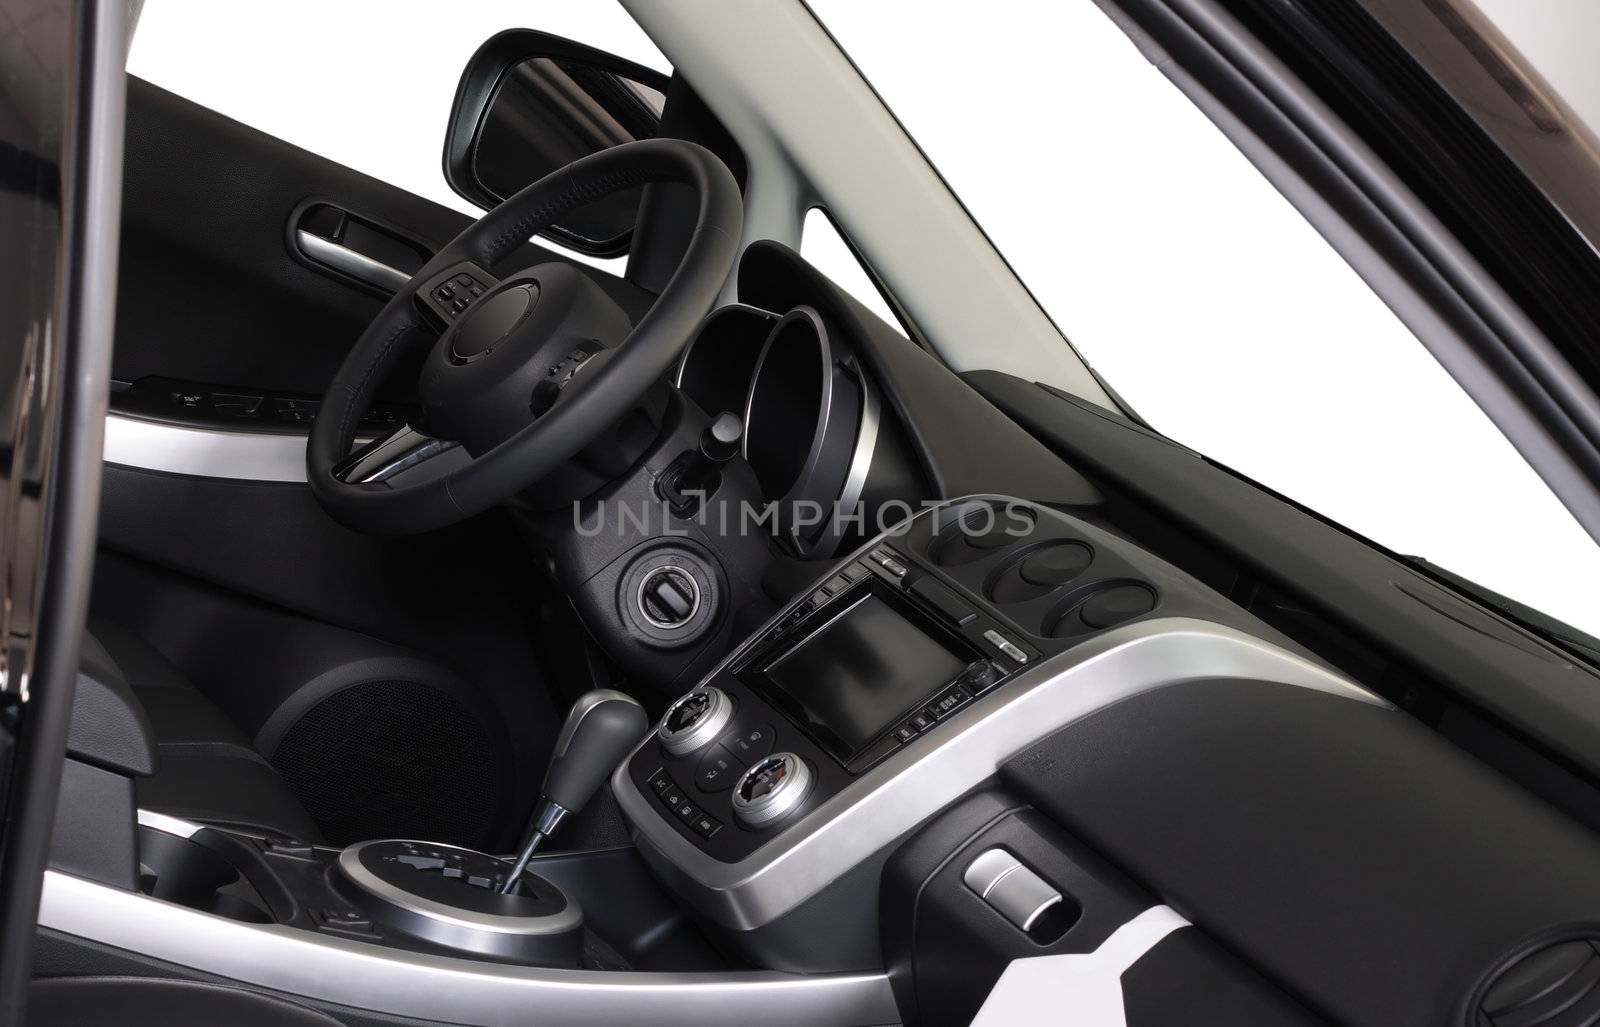 Interior of a car - front seats and dashboard